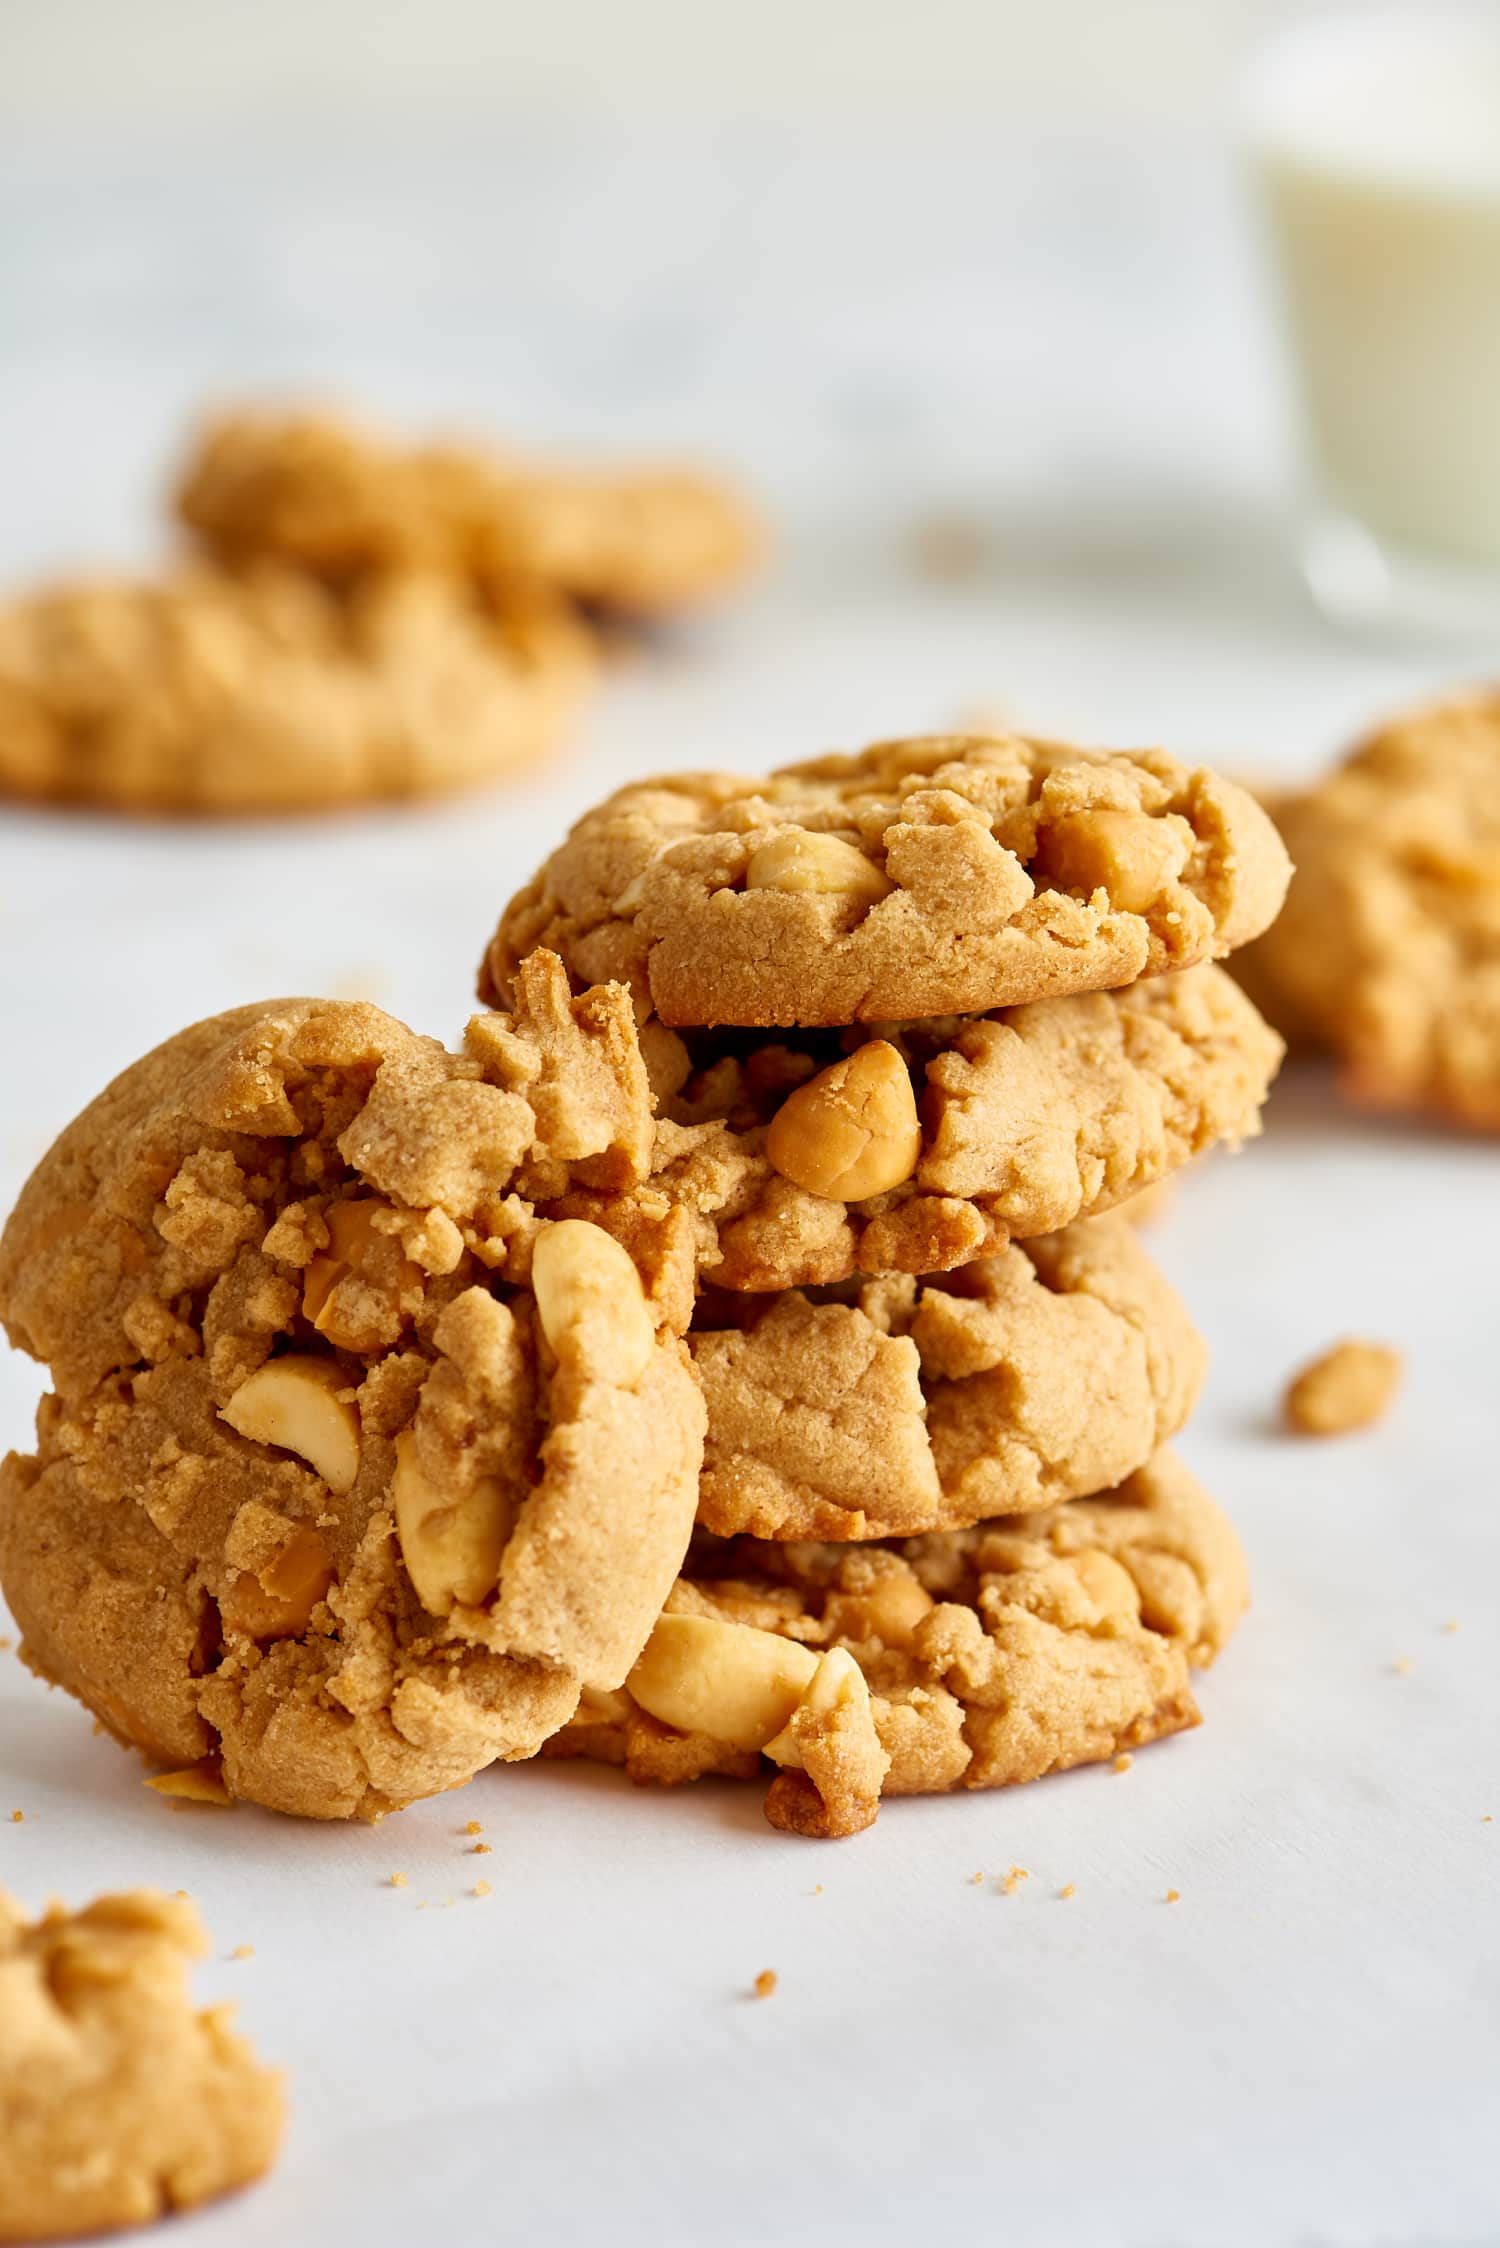 10 Peanut Butter Cookies to Make This Holiday Season | Kitchn